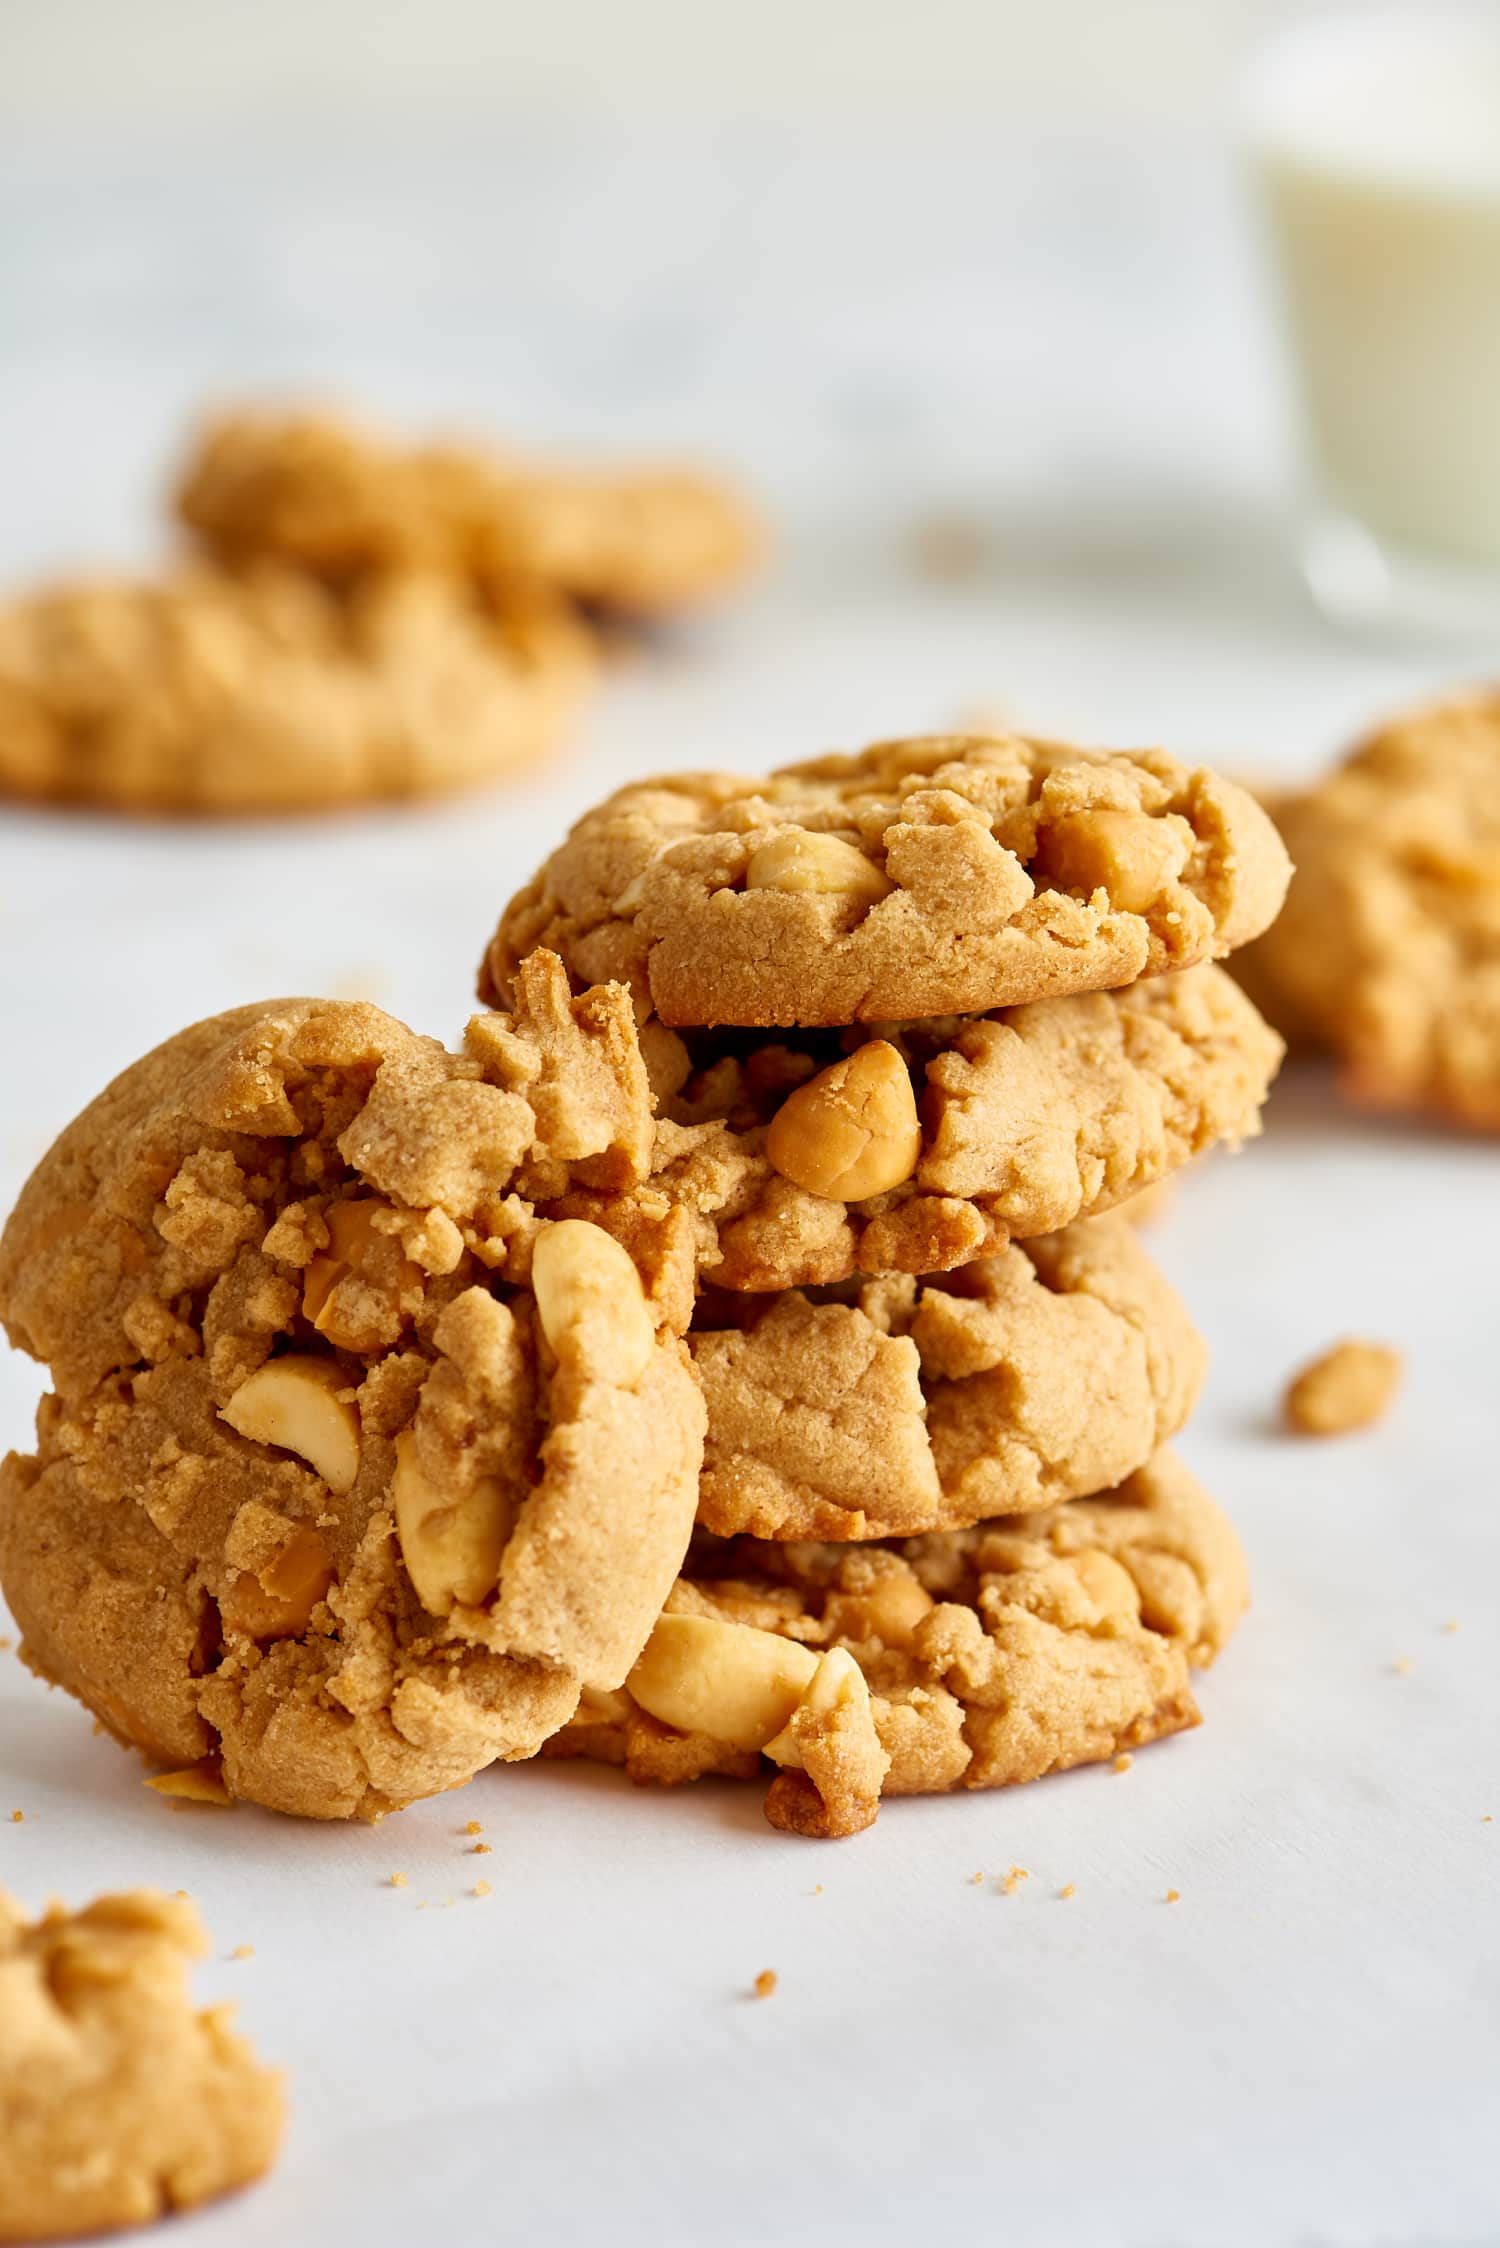 10 Peanut Butter Cookies to Make This Holiday Season | Kitchn